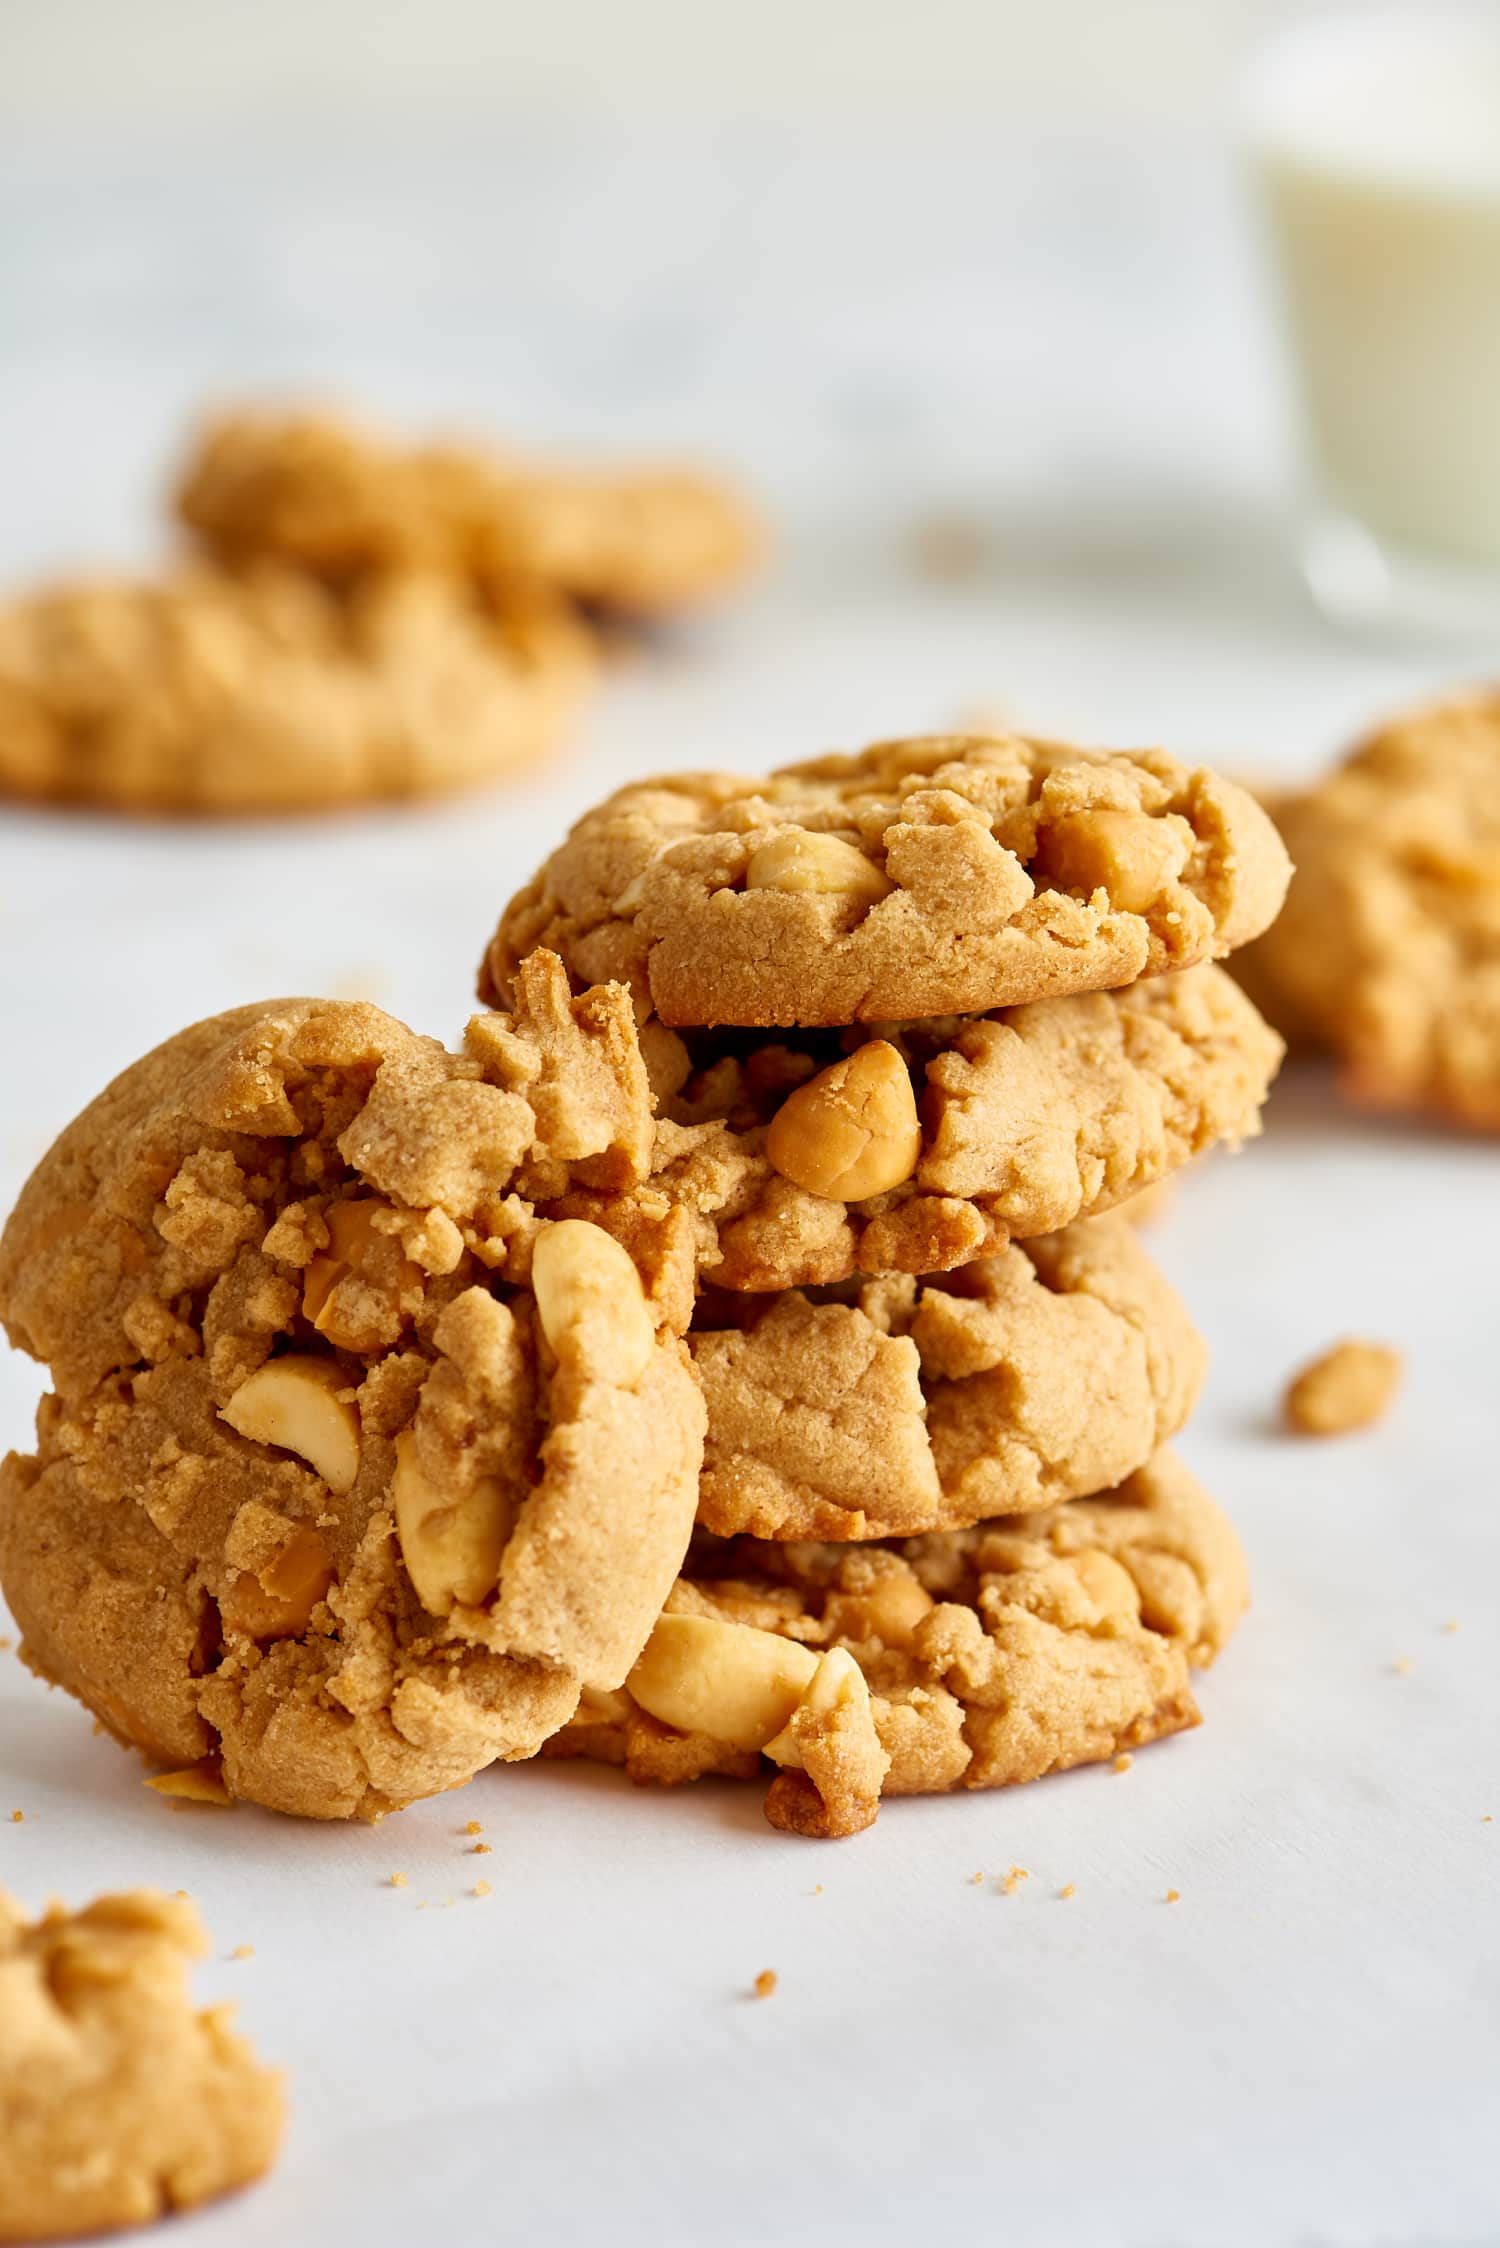 10 Peanut Butter Cookies to Make This Holiday Season | Kitchn